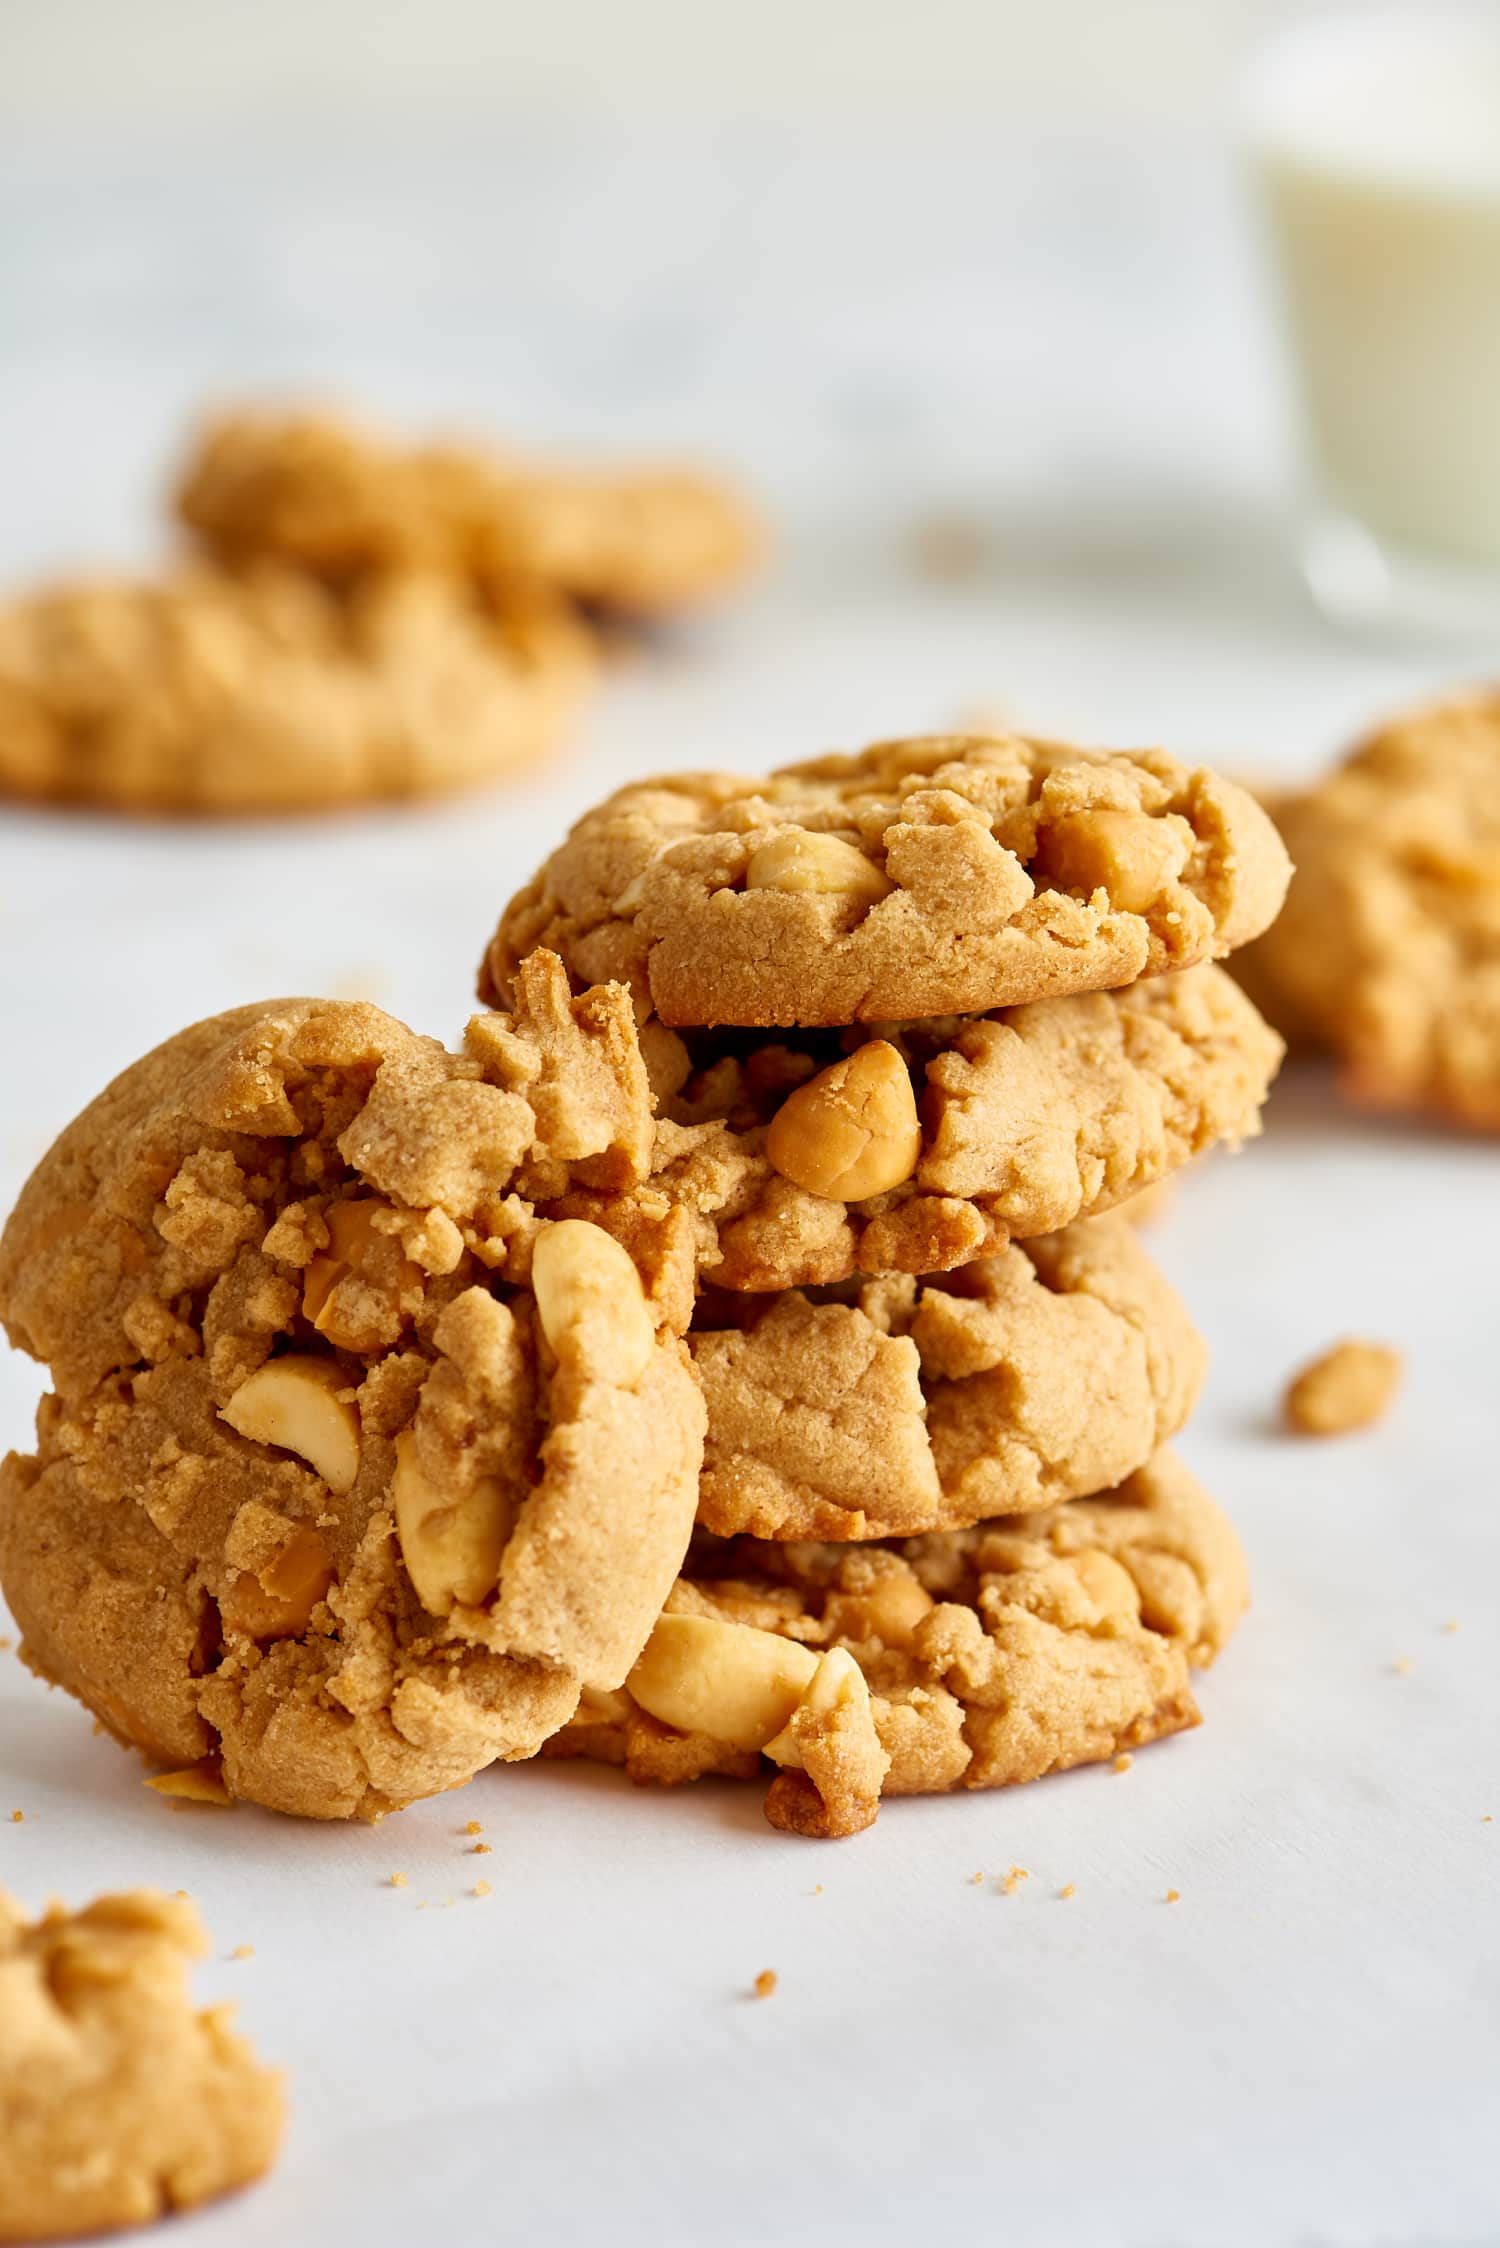 10 Peanut Butter Cookies to Make This Holiday Season | Kitchn